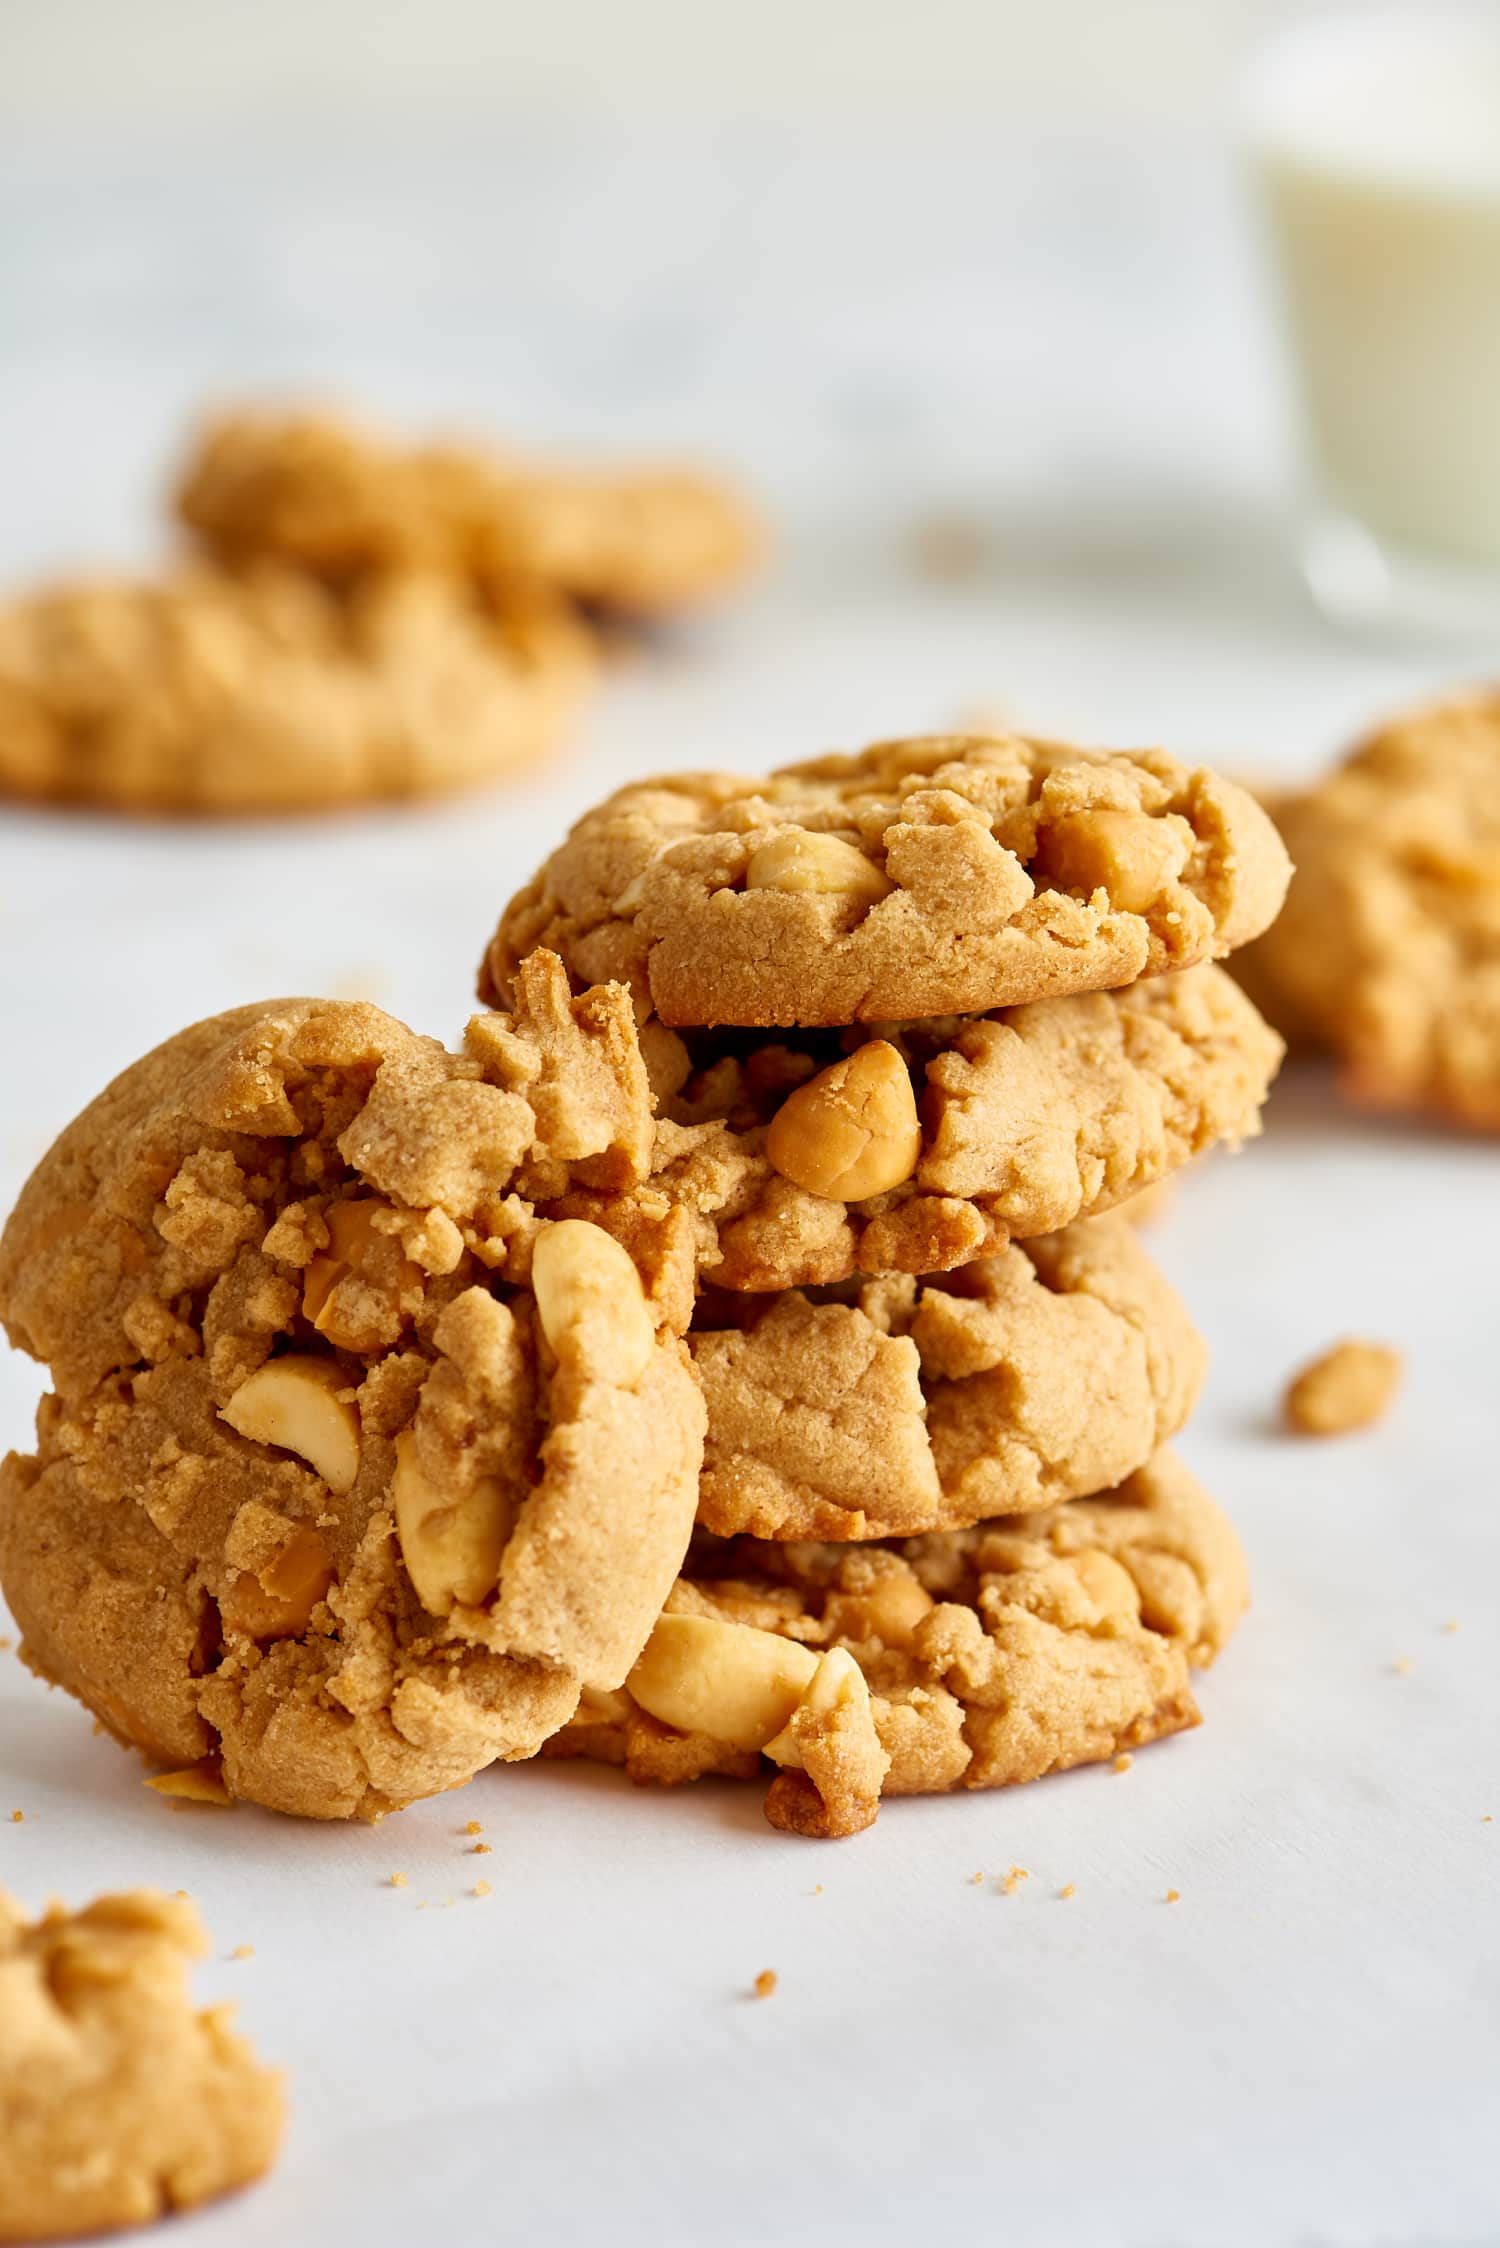 10 Peanut Butter Cookies to Make This Holiday Season | Kitchn